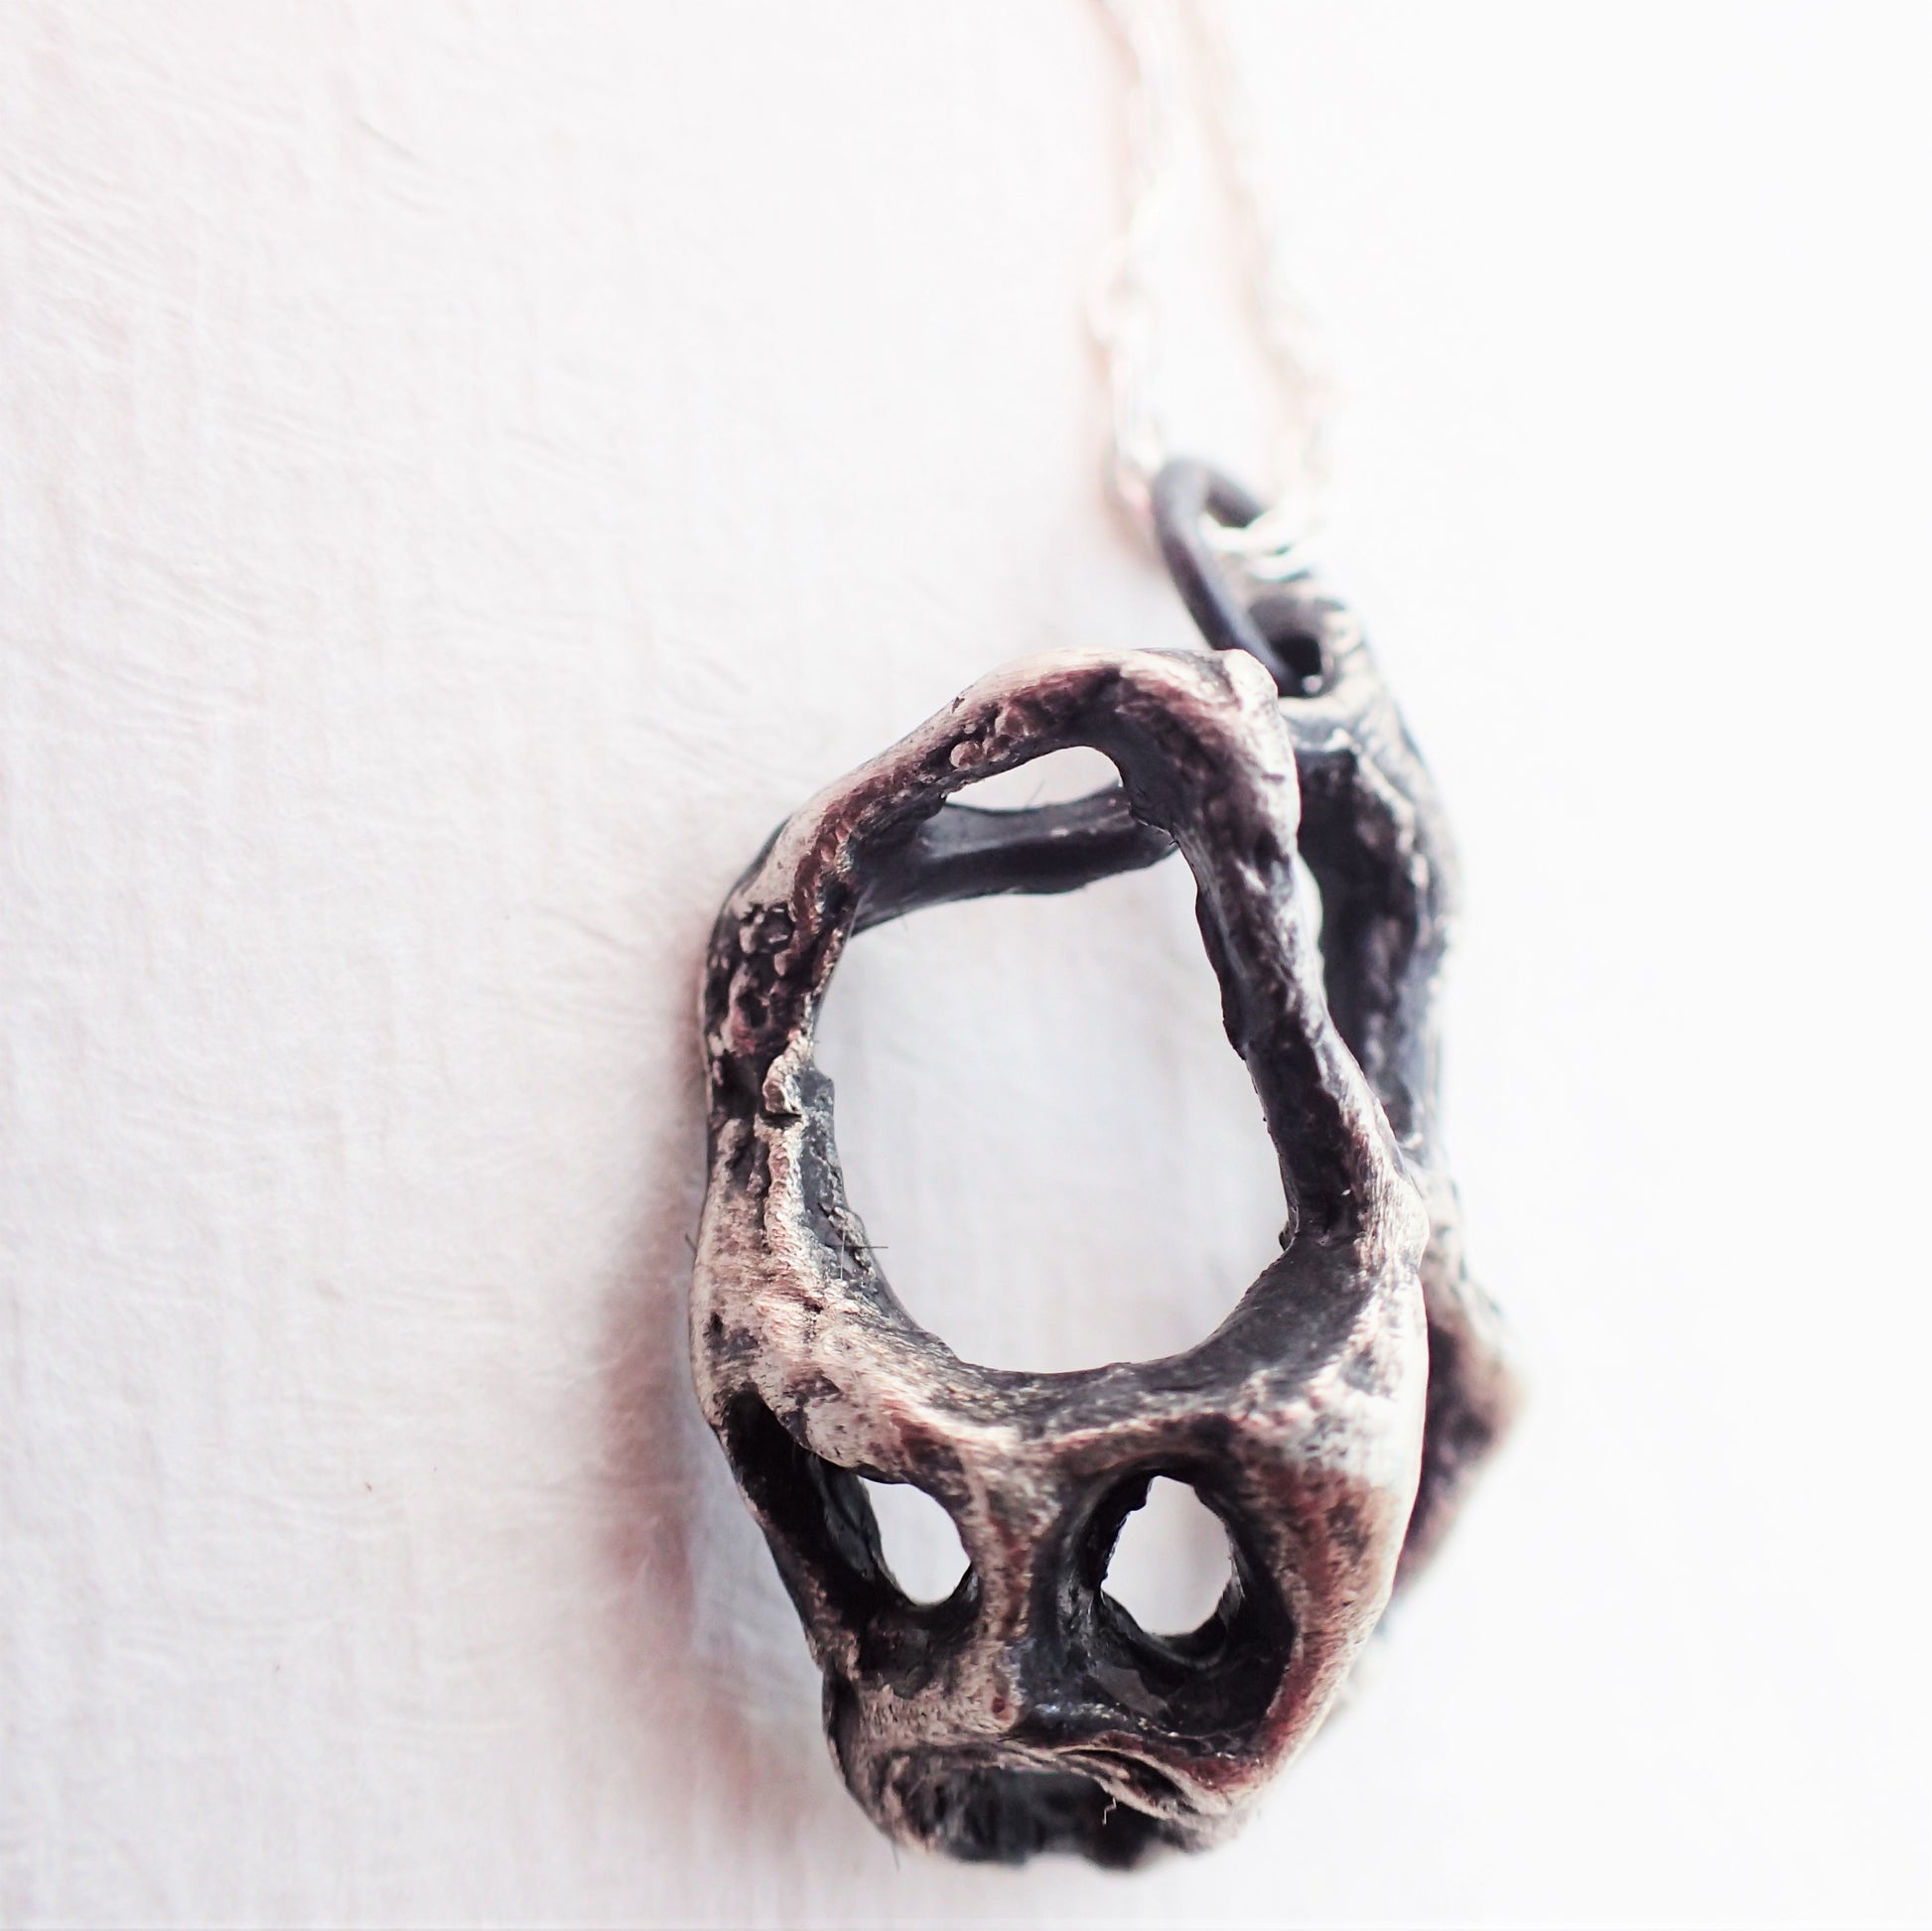 Carved honeycomb cage pendant. Oxidised silver necklace.-Jewellery-Beca Beeby